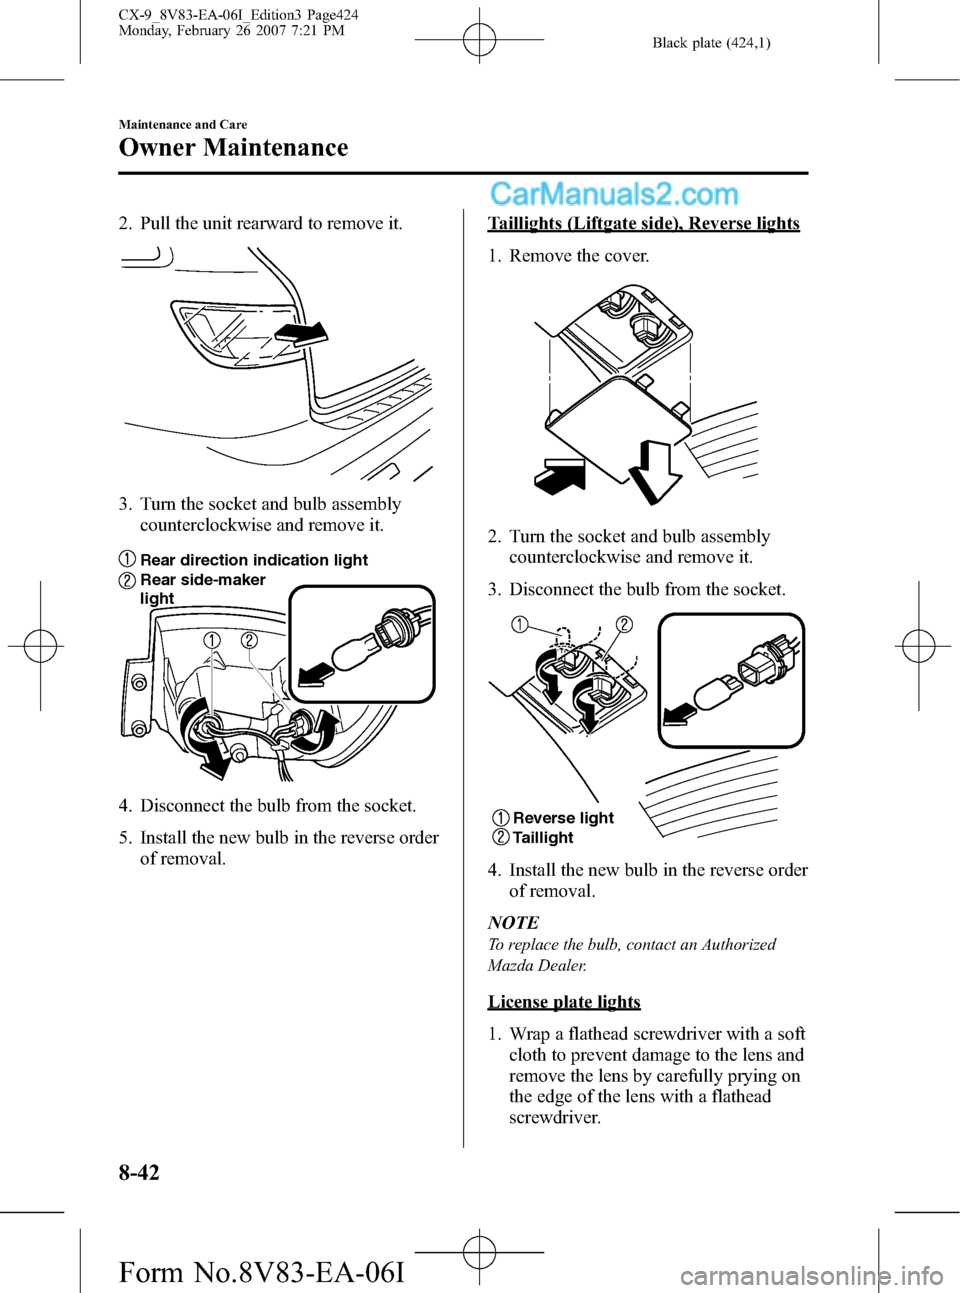 MAZDA MODEL CX-9 2007   (in English) User Guide Black plate (424,1)
2. Pull the unit rearward to remove it.
3. Turn the socket and bulb assembly
counterclockwise and remove it.
Rear side-maker 
light
Rear direction indication light
4. Disconnect th